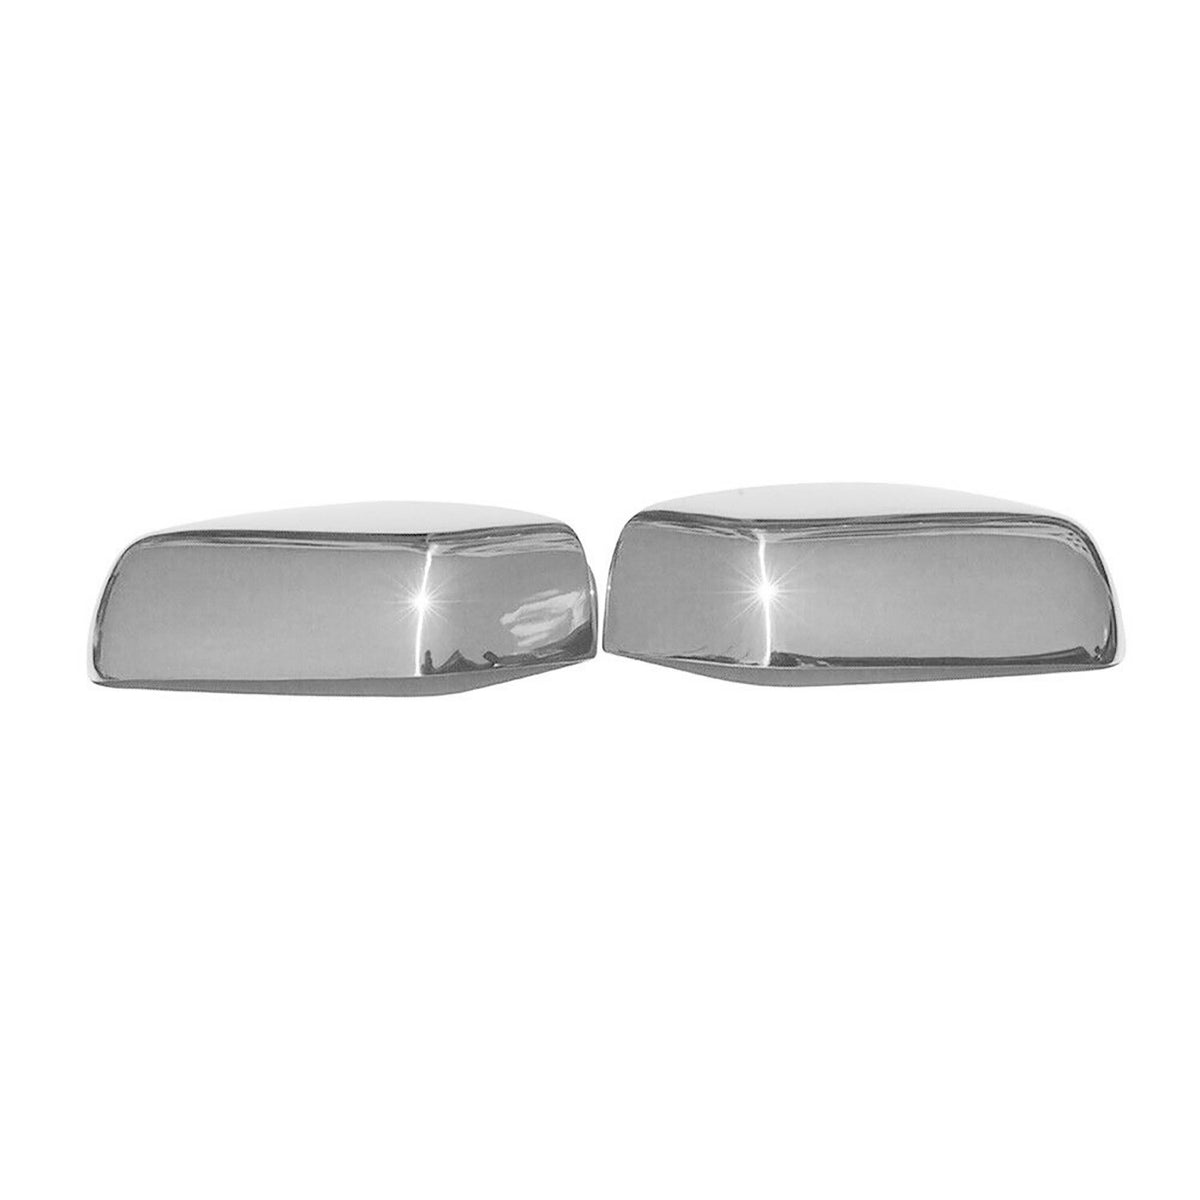 Mirror caps mirror cover for Jeep Patriot 2007-2017 stainless steel silver 2 pieces